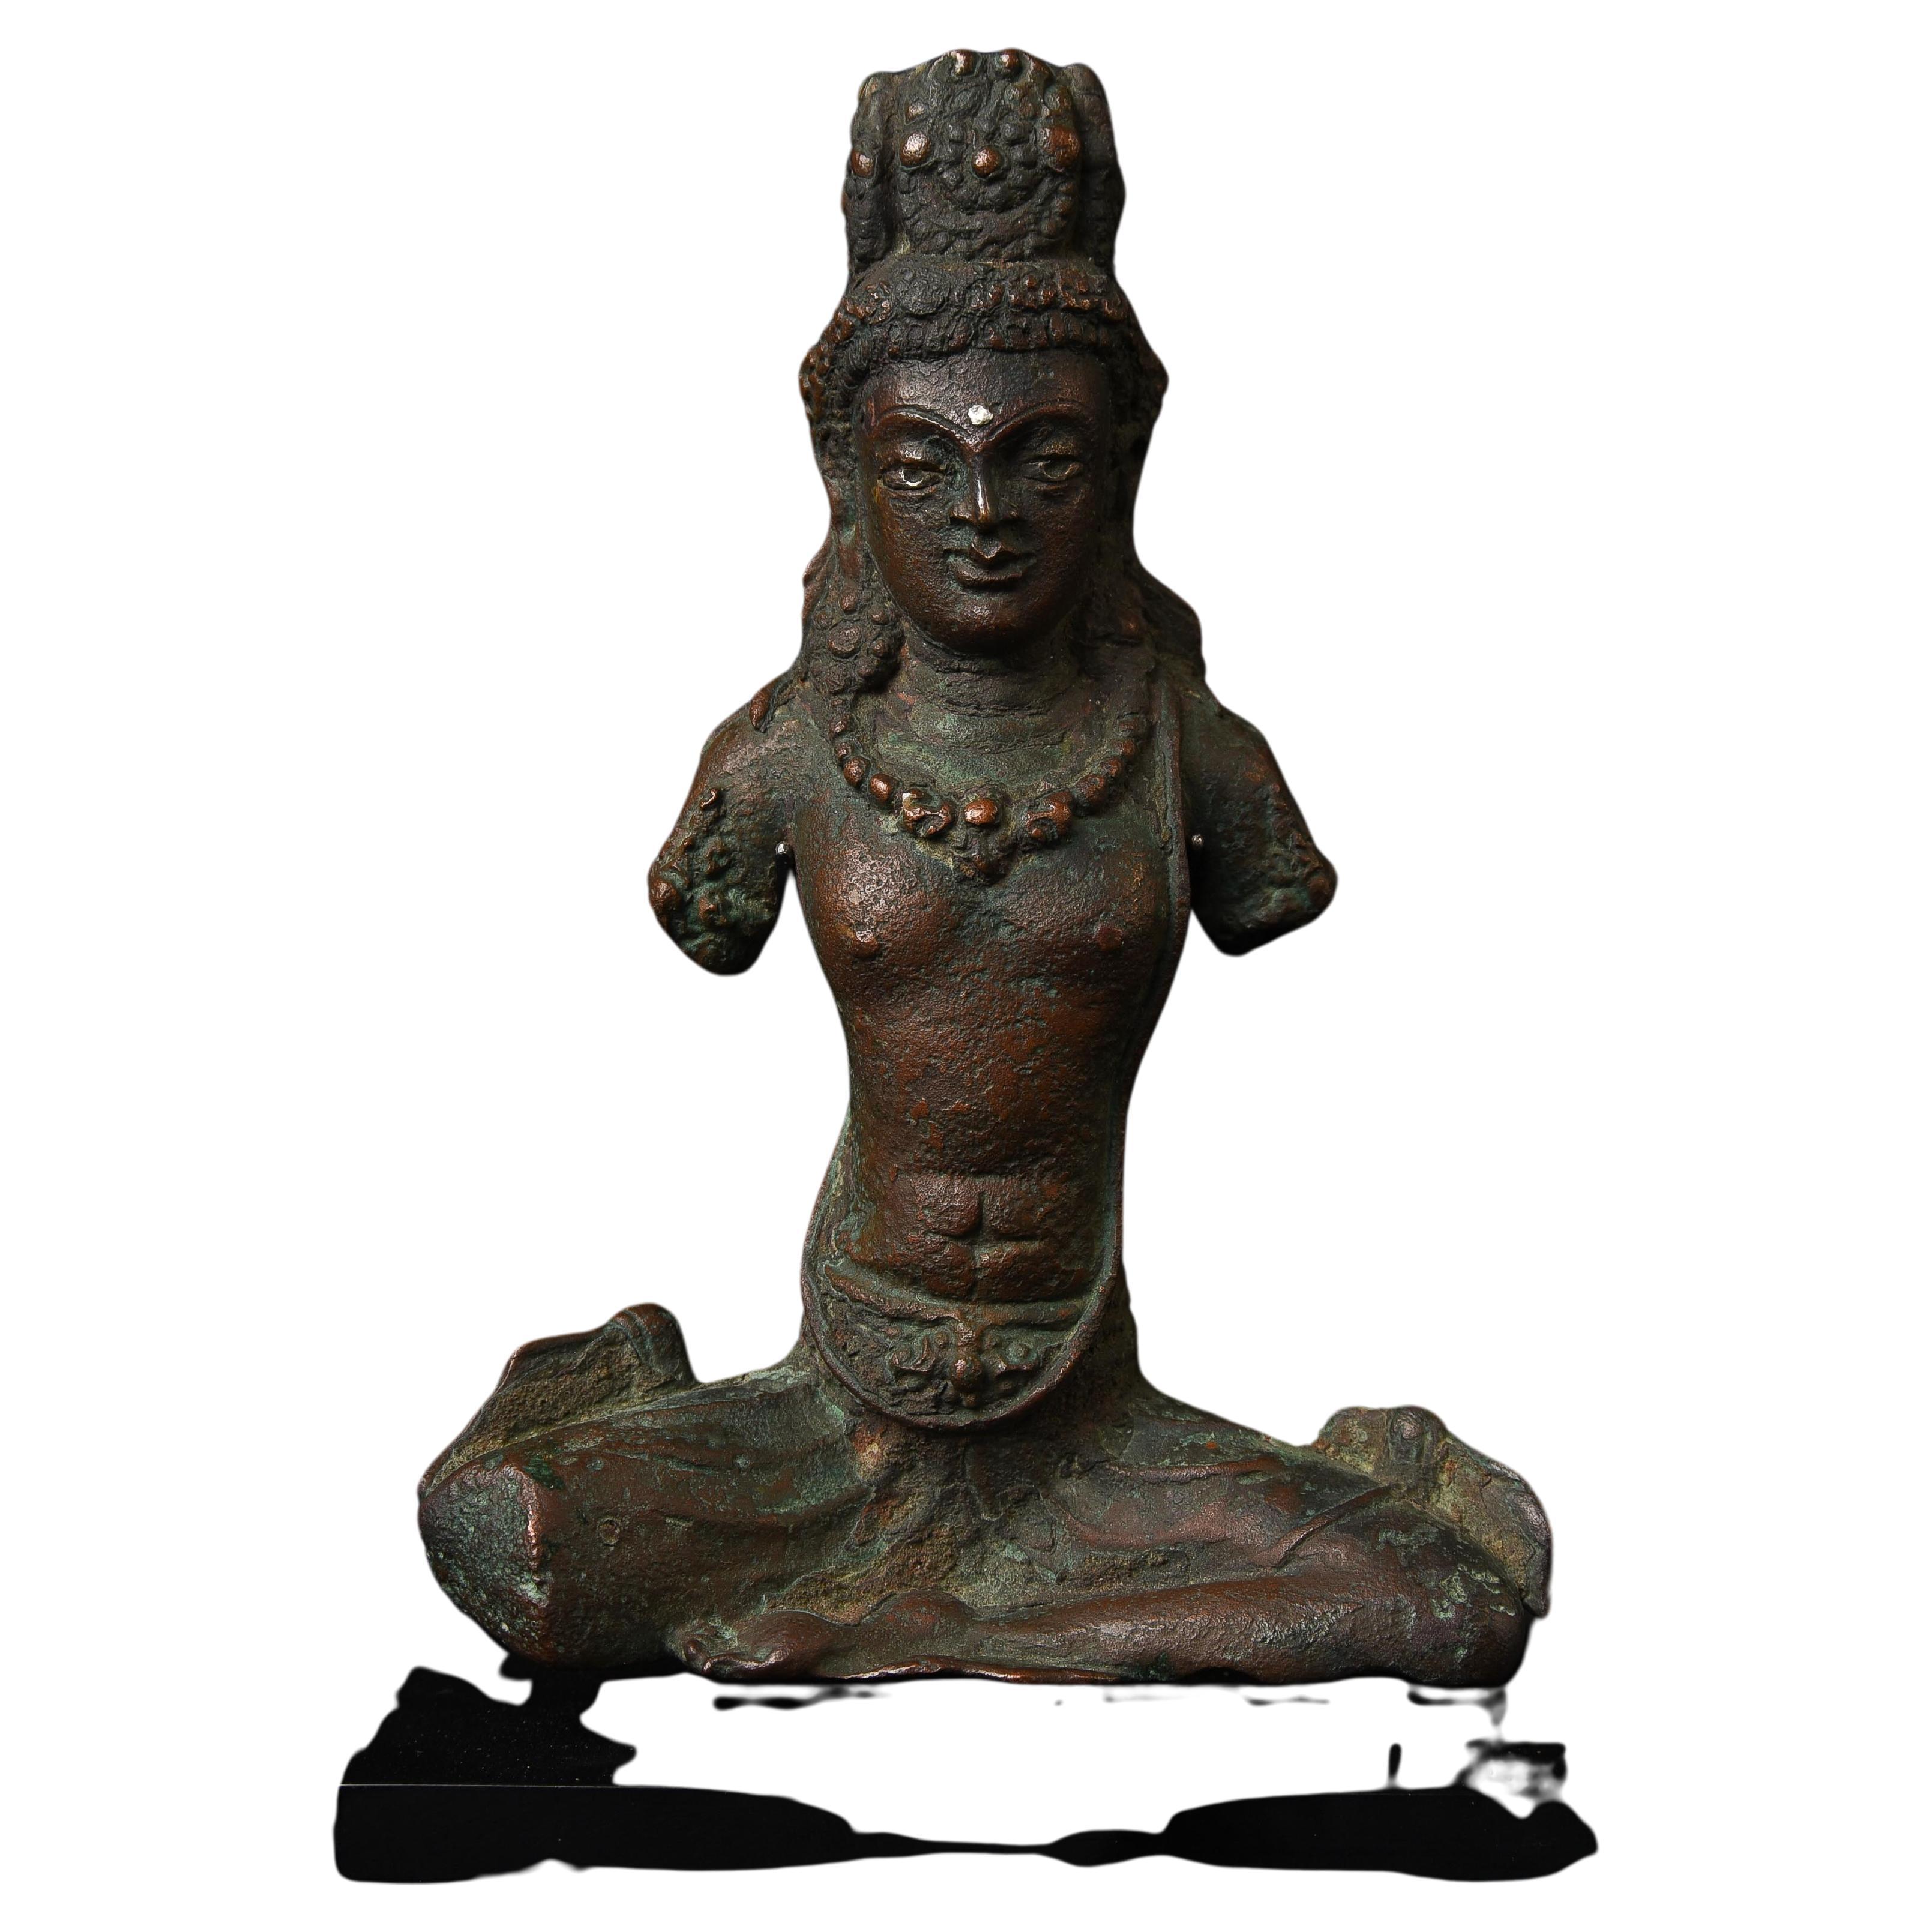 11th century West Tibetan bronze bodhisattva with Silver Inlays-  I present to you a remarkable sculpture from Western Tibet that brings much more of a Western influence to it than the vast majority of Buddhist sculptures. you can almost feel the